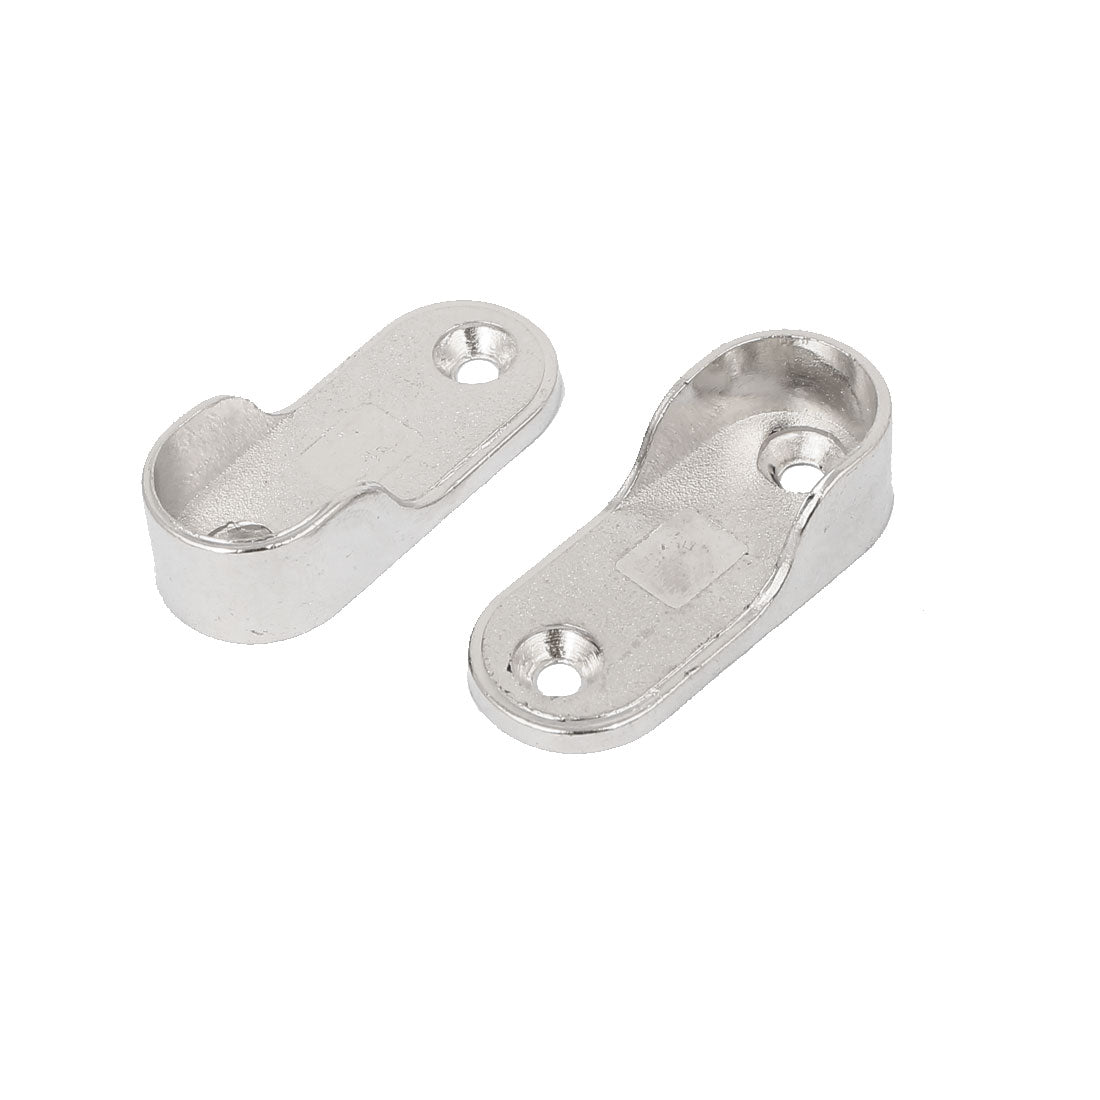 uxcell Uxcell 43x16mm Oval Pipe Wardrobe Rail Support Bracket Flange Holder Silver Tone 2pcs